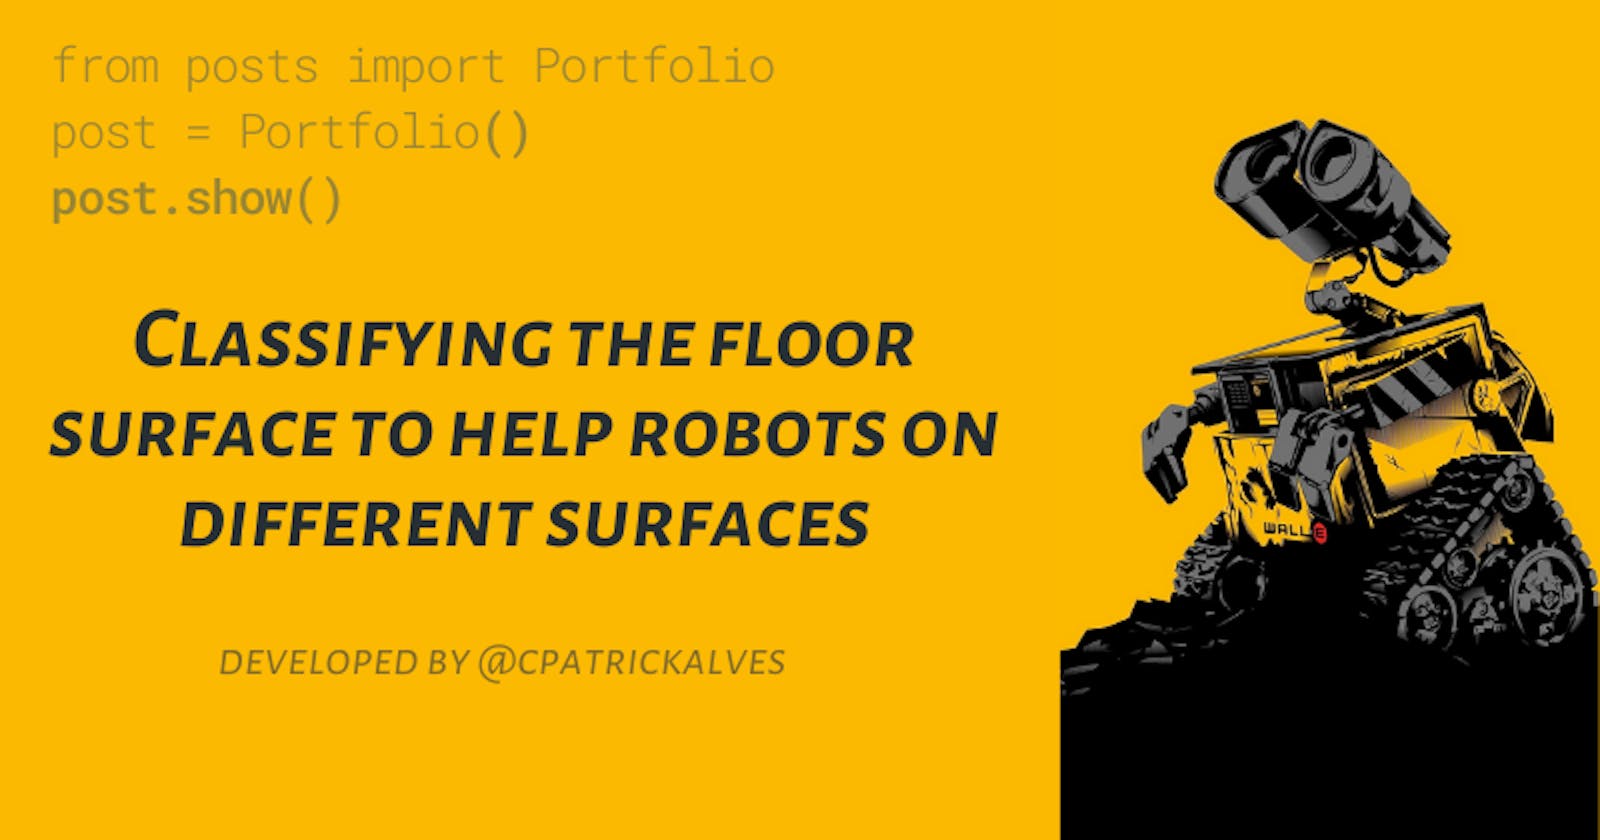 Classifying the floor surface to help robots on different surfaces